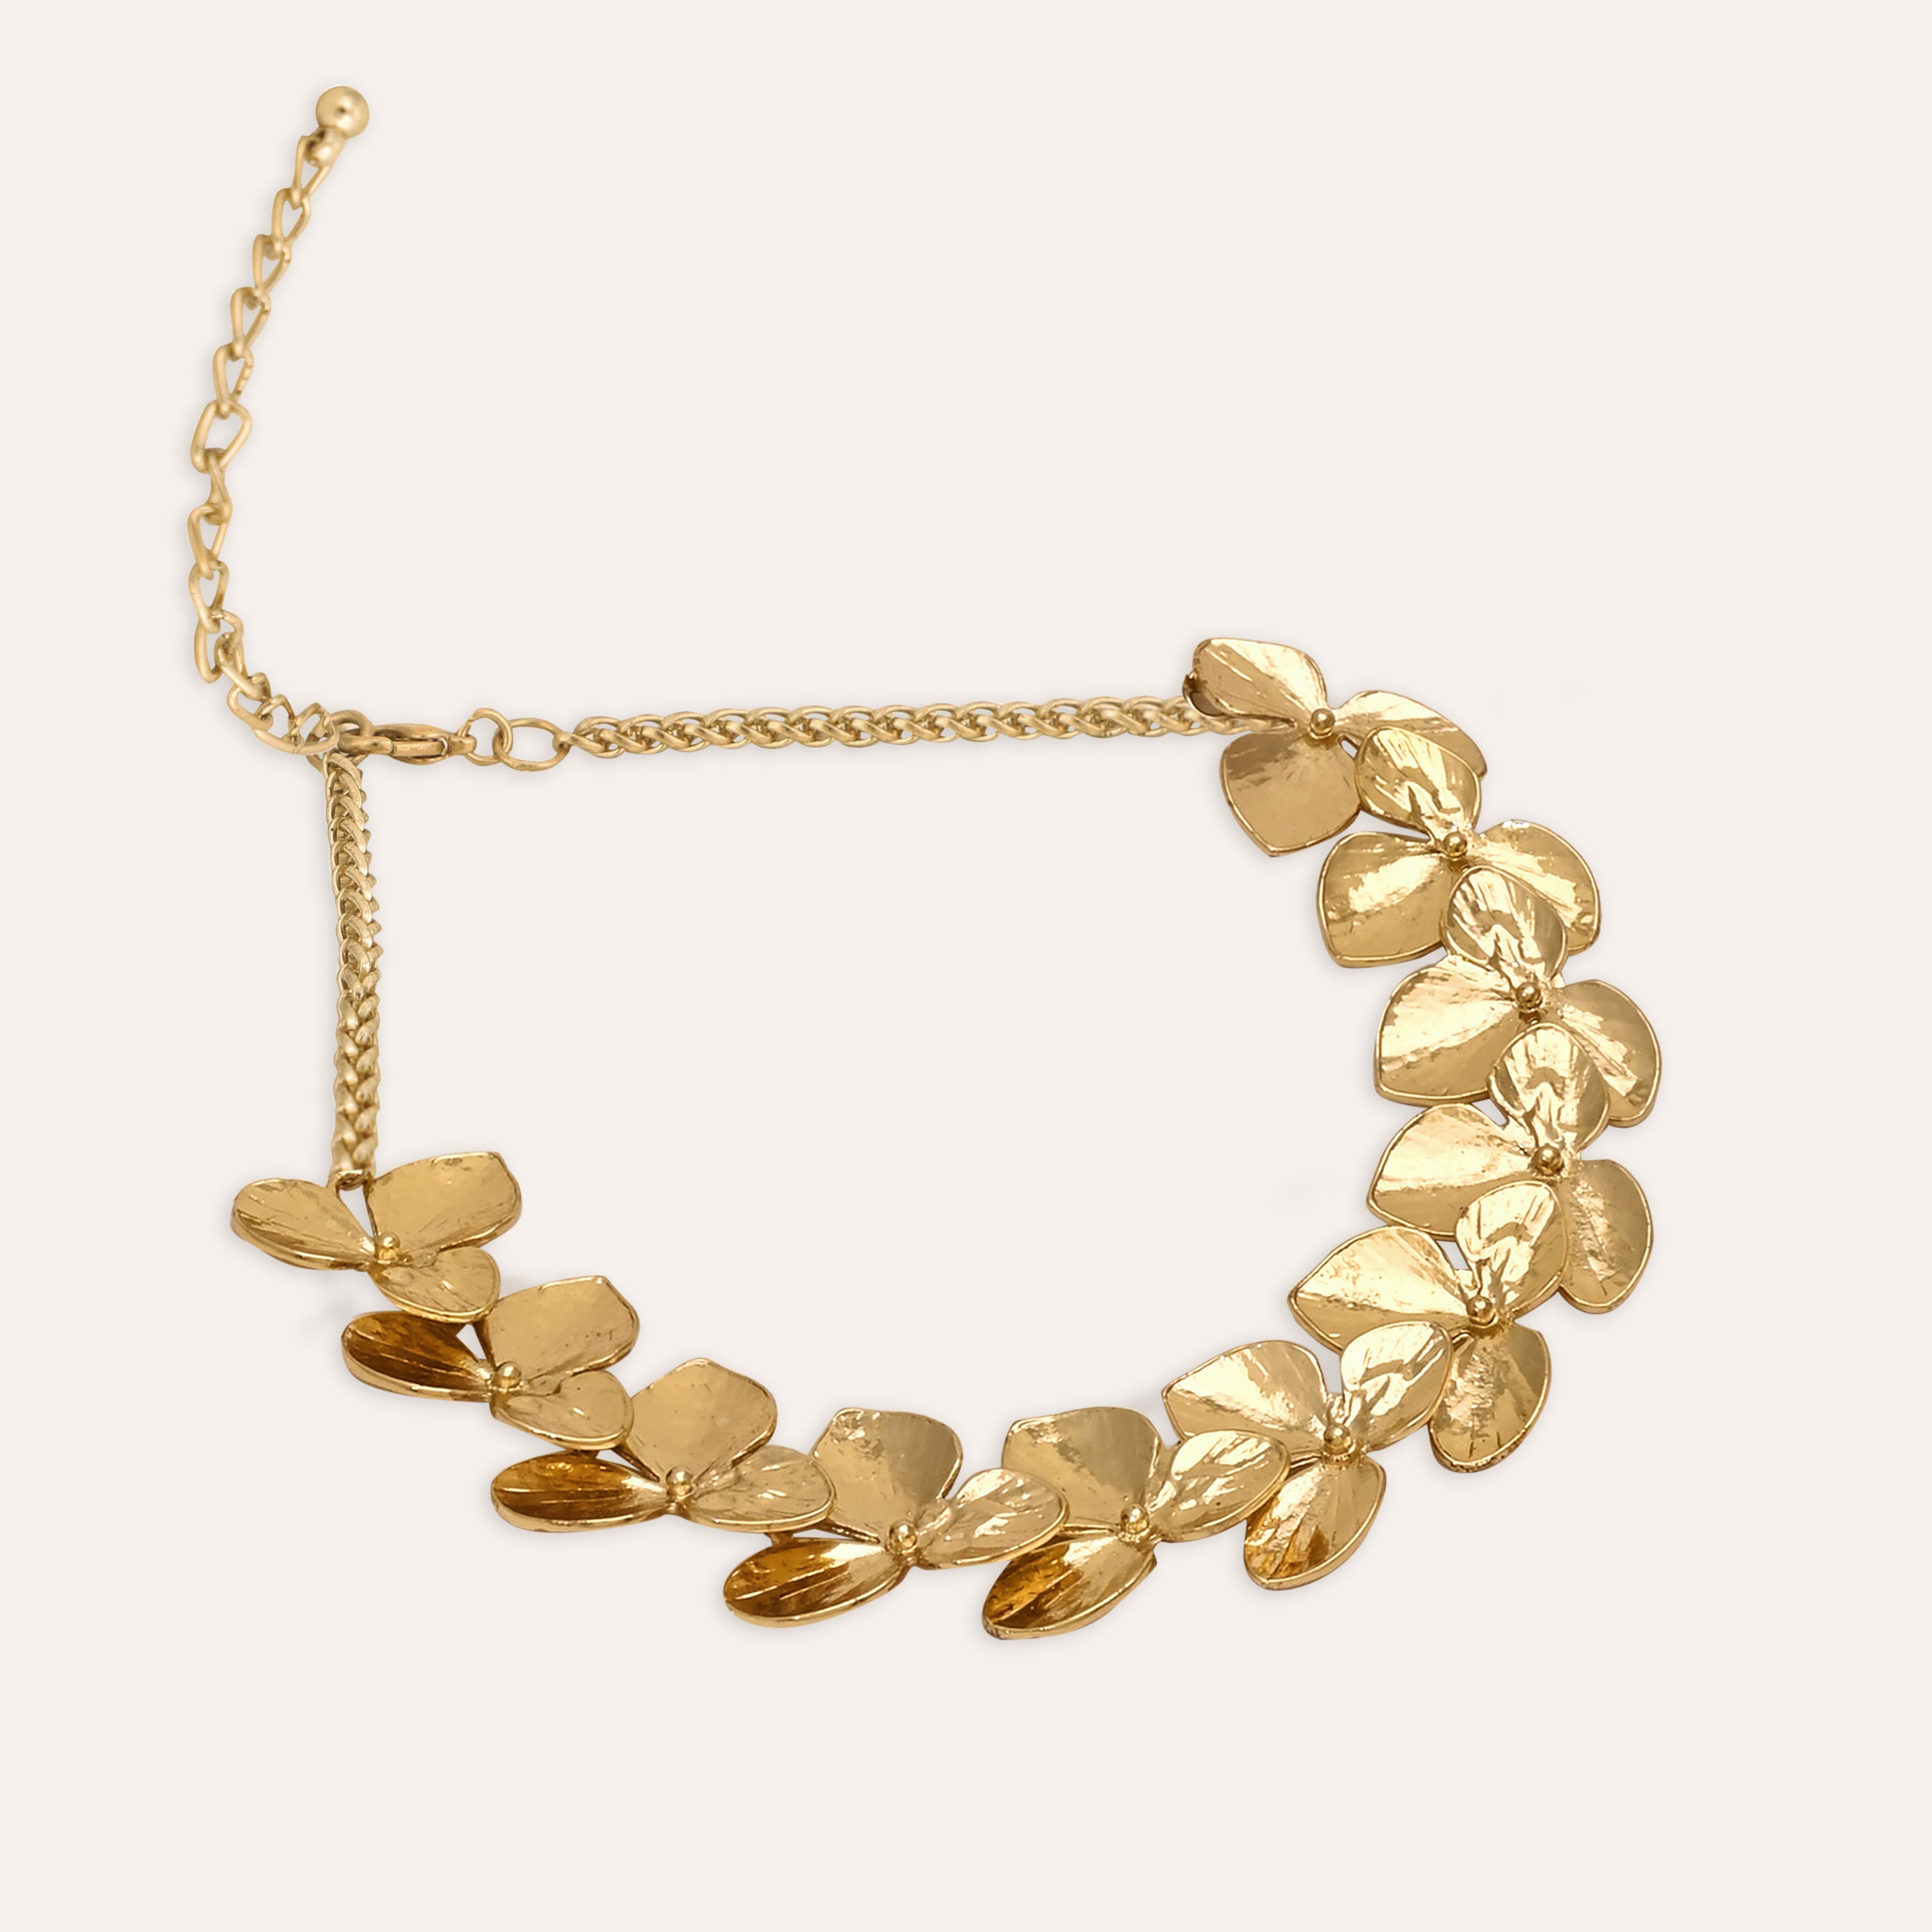 TFC Pretty Petal Gold Plated Necklace-Enhance your elegance with our collection of gold-plated necklaces for women. Choose from stunning pendant necklaces, chic choker necklaces, and trendy layered necklaces. Our sleek and dainty designs are both affordable and anti-tarnish, ensuring lasting beauty. Enjoy the cheapest fashion jewellery, lightweight and stylish- only at The Fun Company